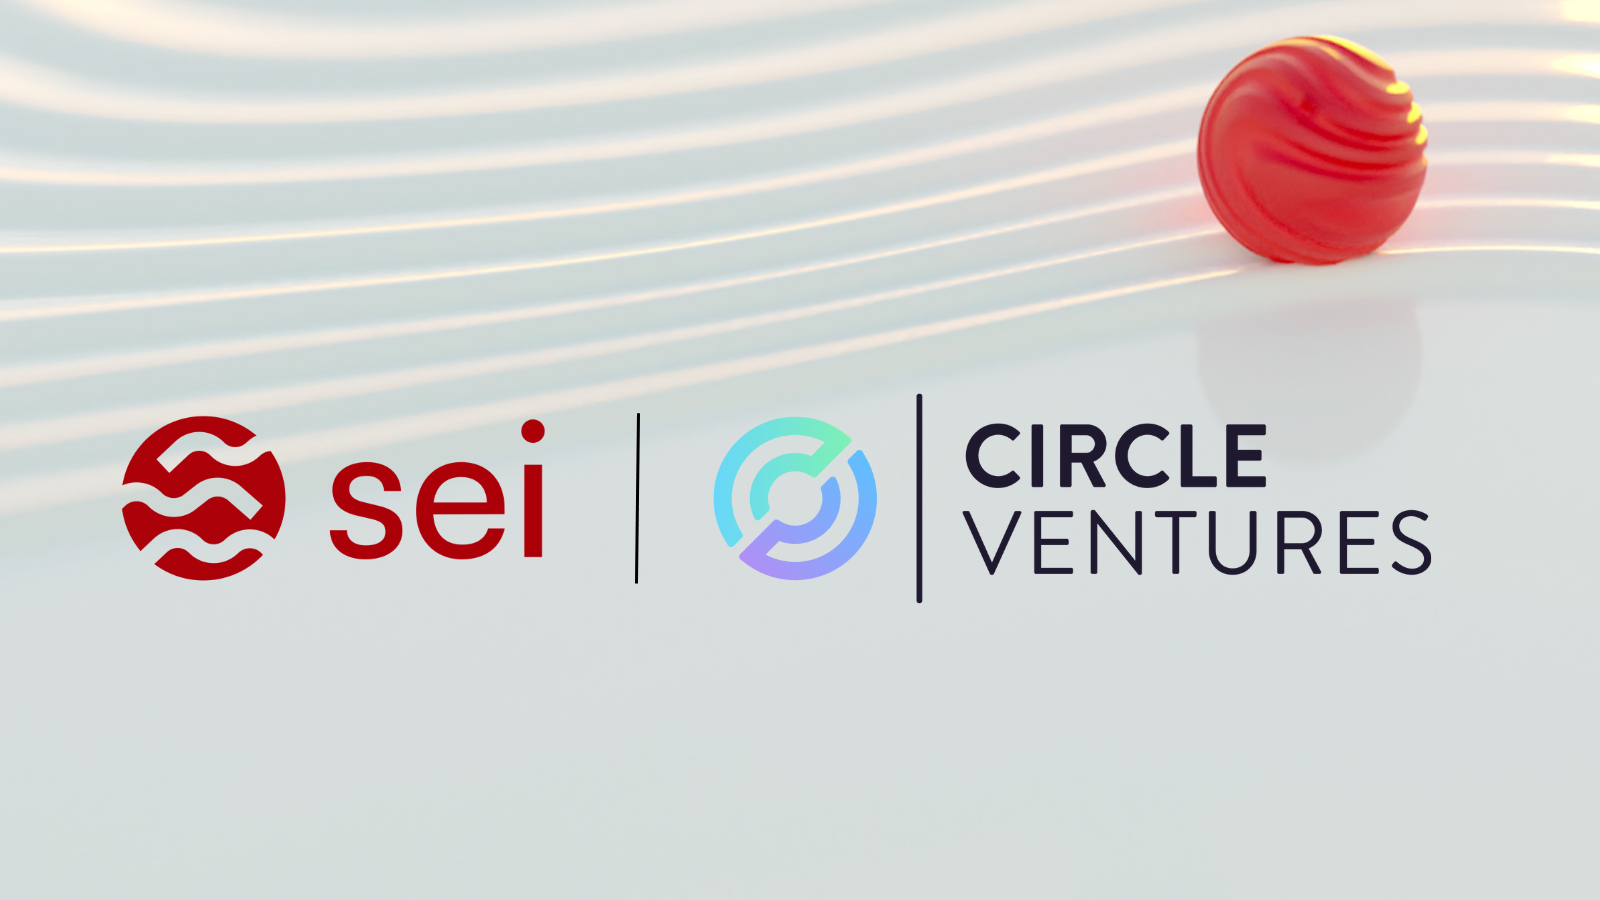 Circle Ventures Makes Strategic Investment in Sei to activate USDC Use Cases